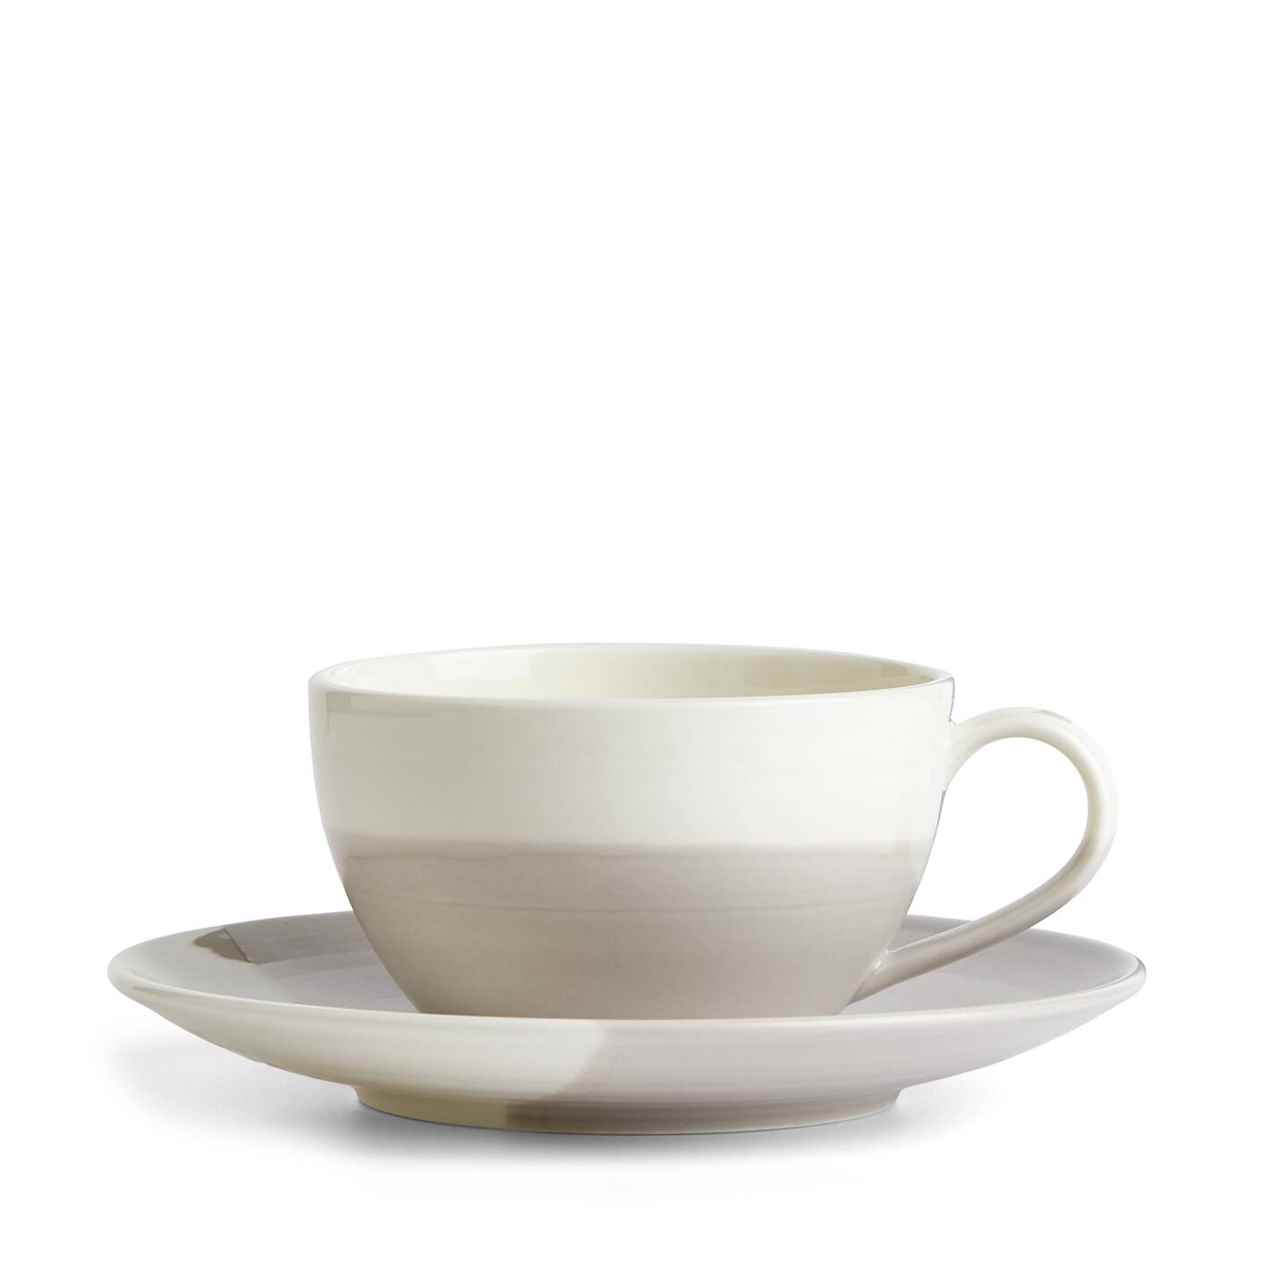 Coffee Studio Cappuccino Cup and Saucer